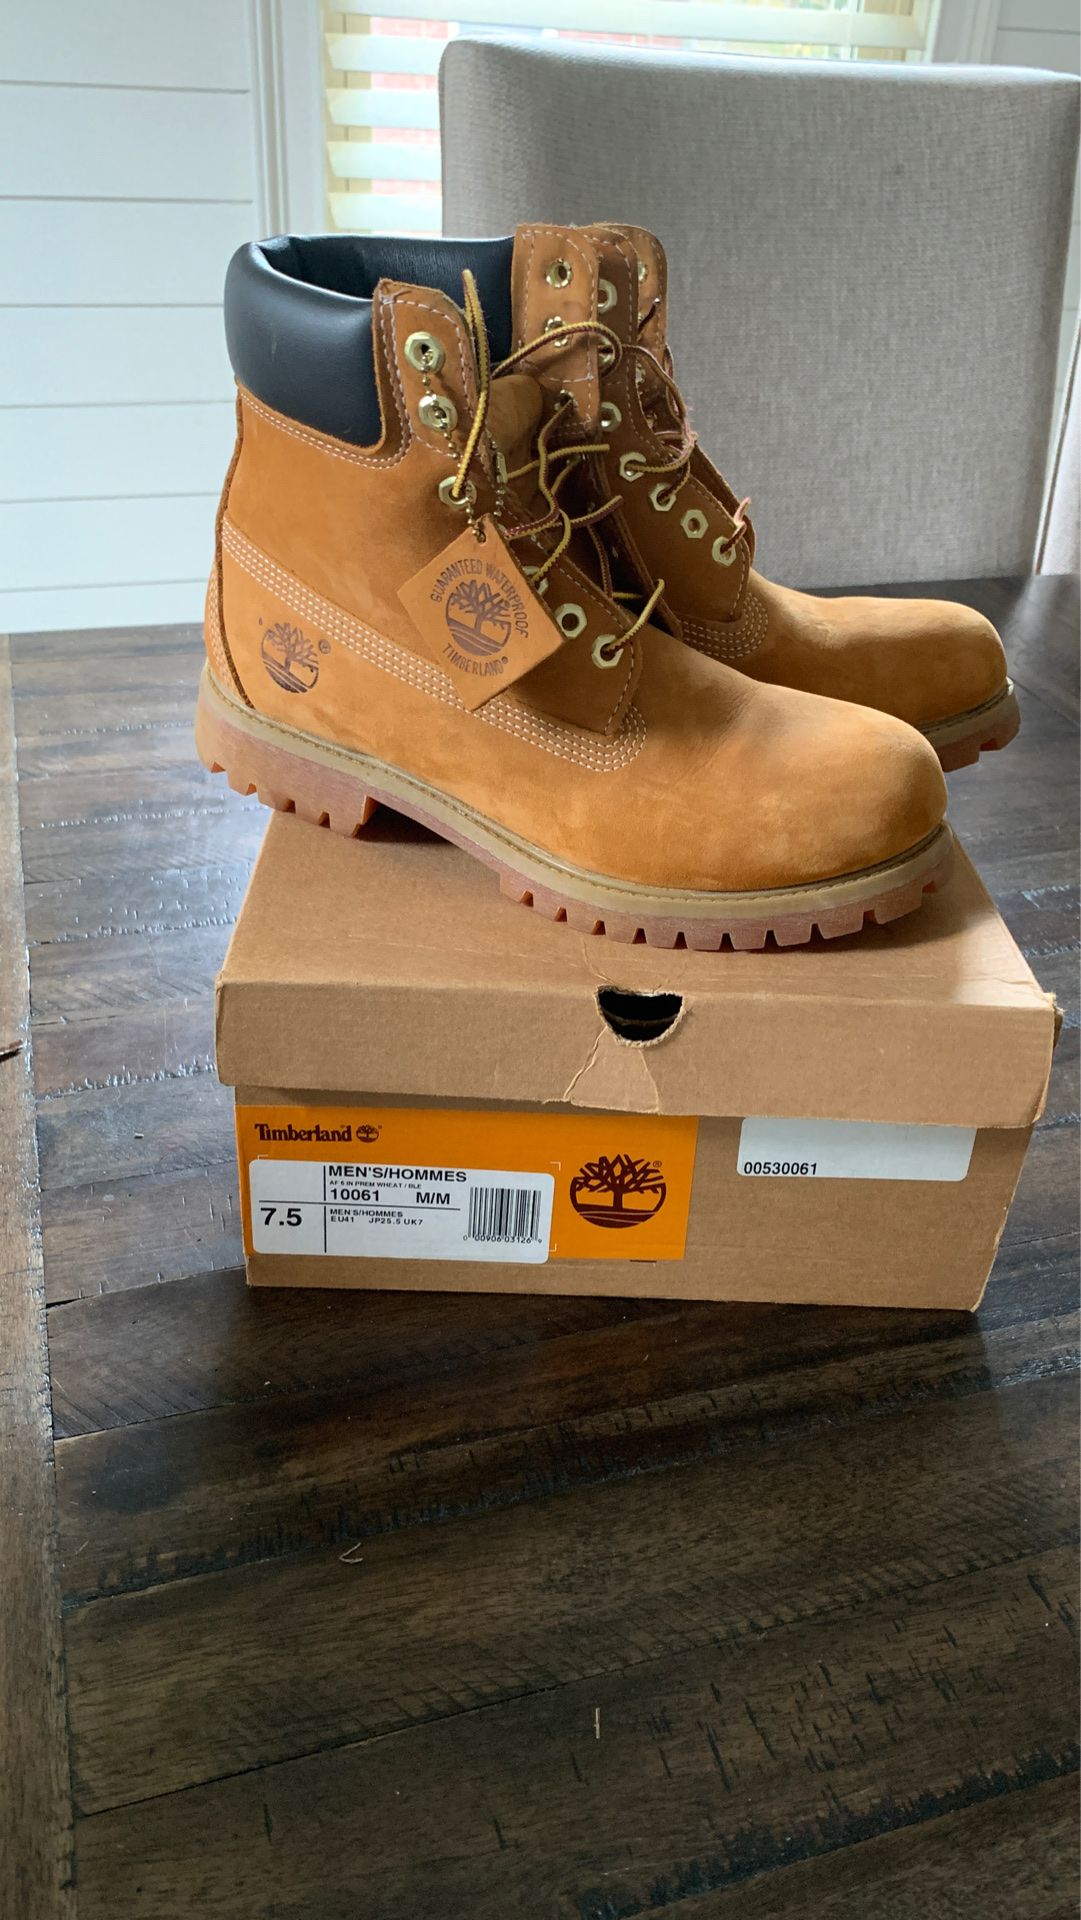 Timberland boots size 7.5 men’s-never worn